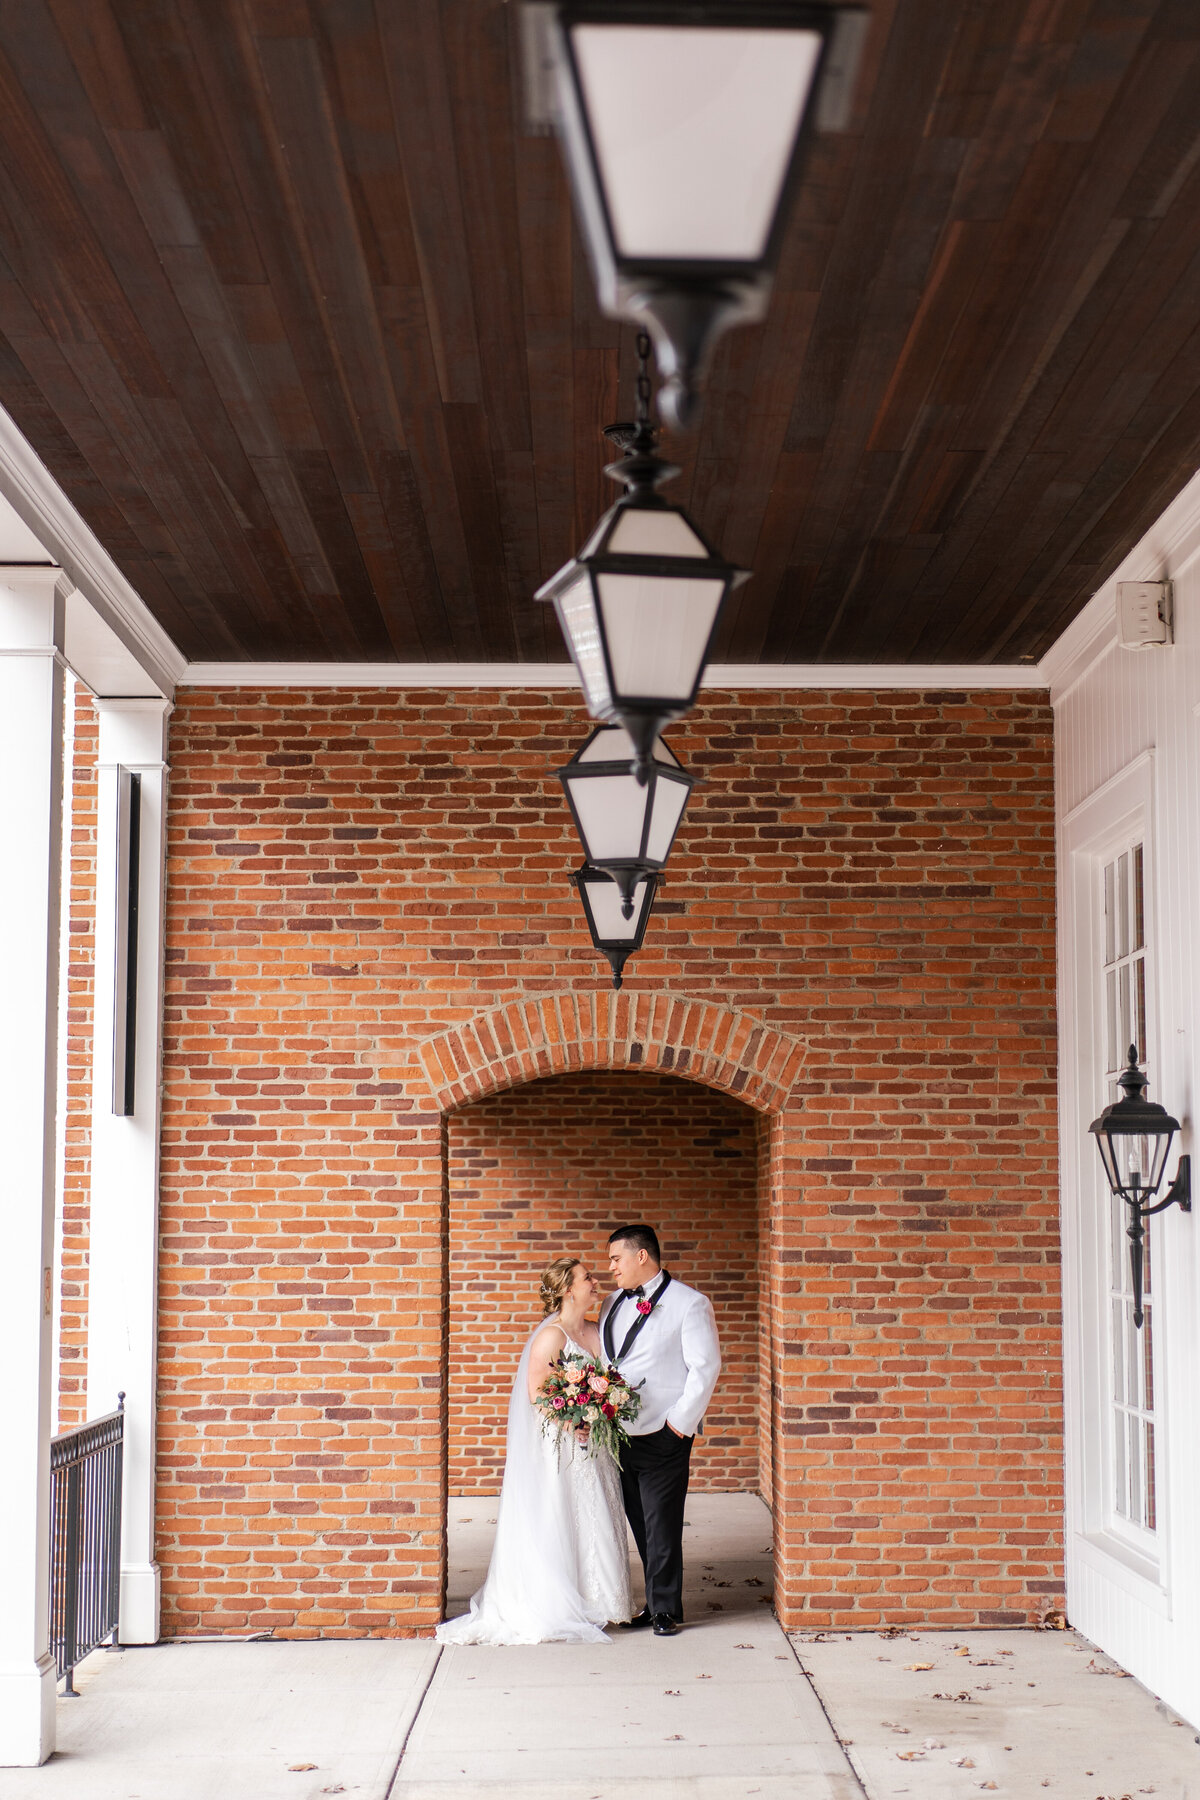 Bride and groom look lovingly at each other under a brick arch at Nationwide Hotel and Conference Center in Lewis Center, Ohio.